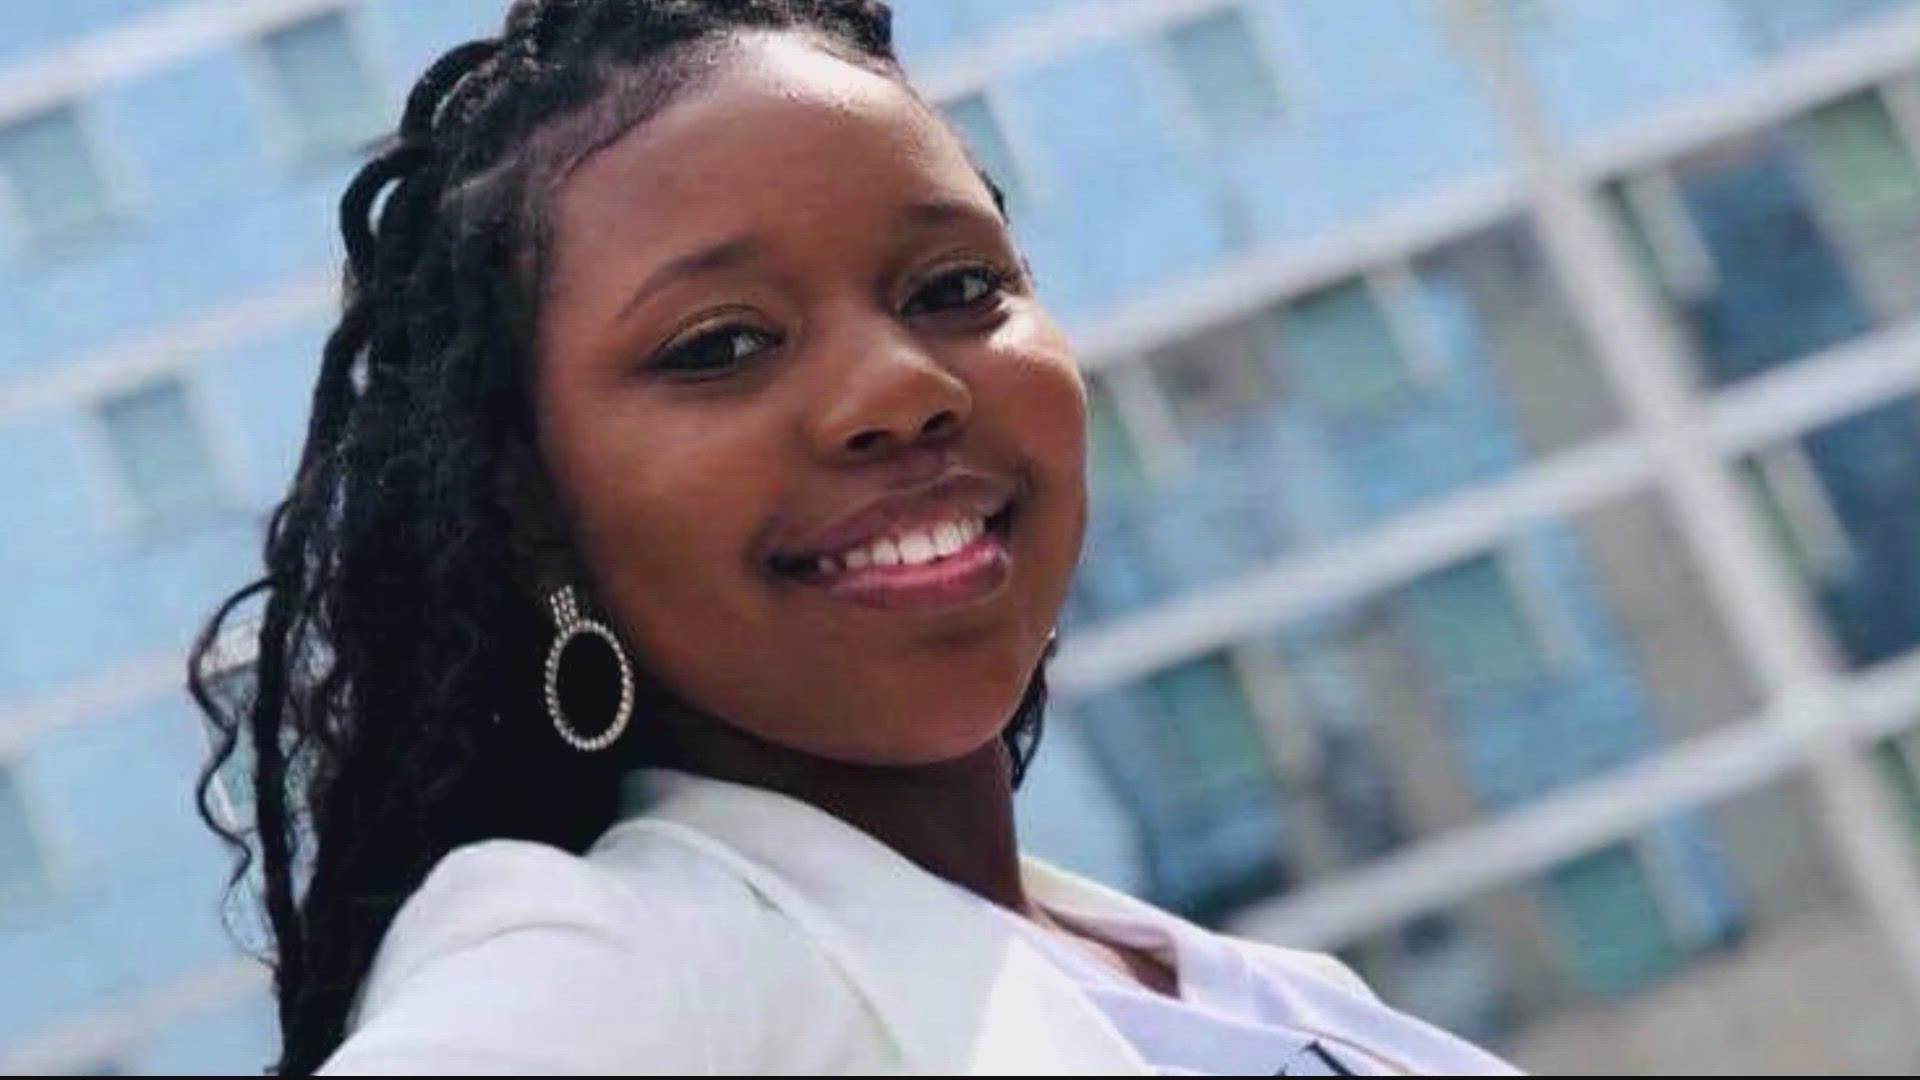 The Black & Missing Foundation says amid the investigation into the Carlee Russell case, there’s more awareness on the alarming rate of missing Black people.